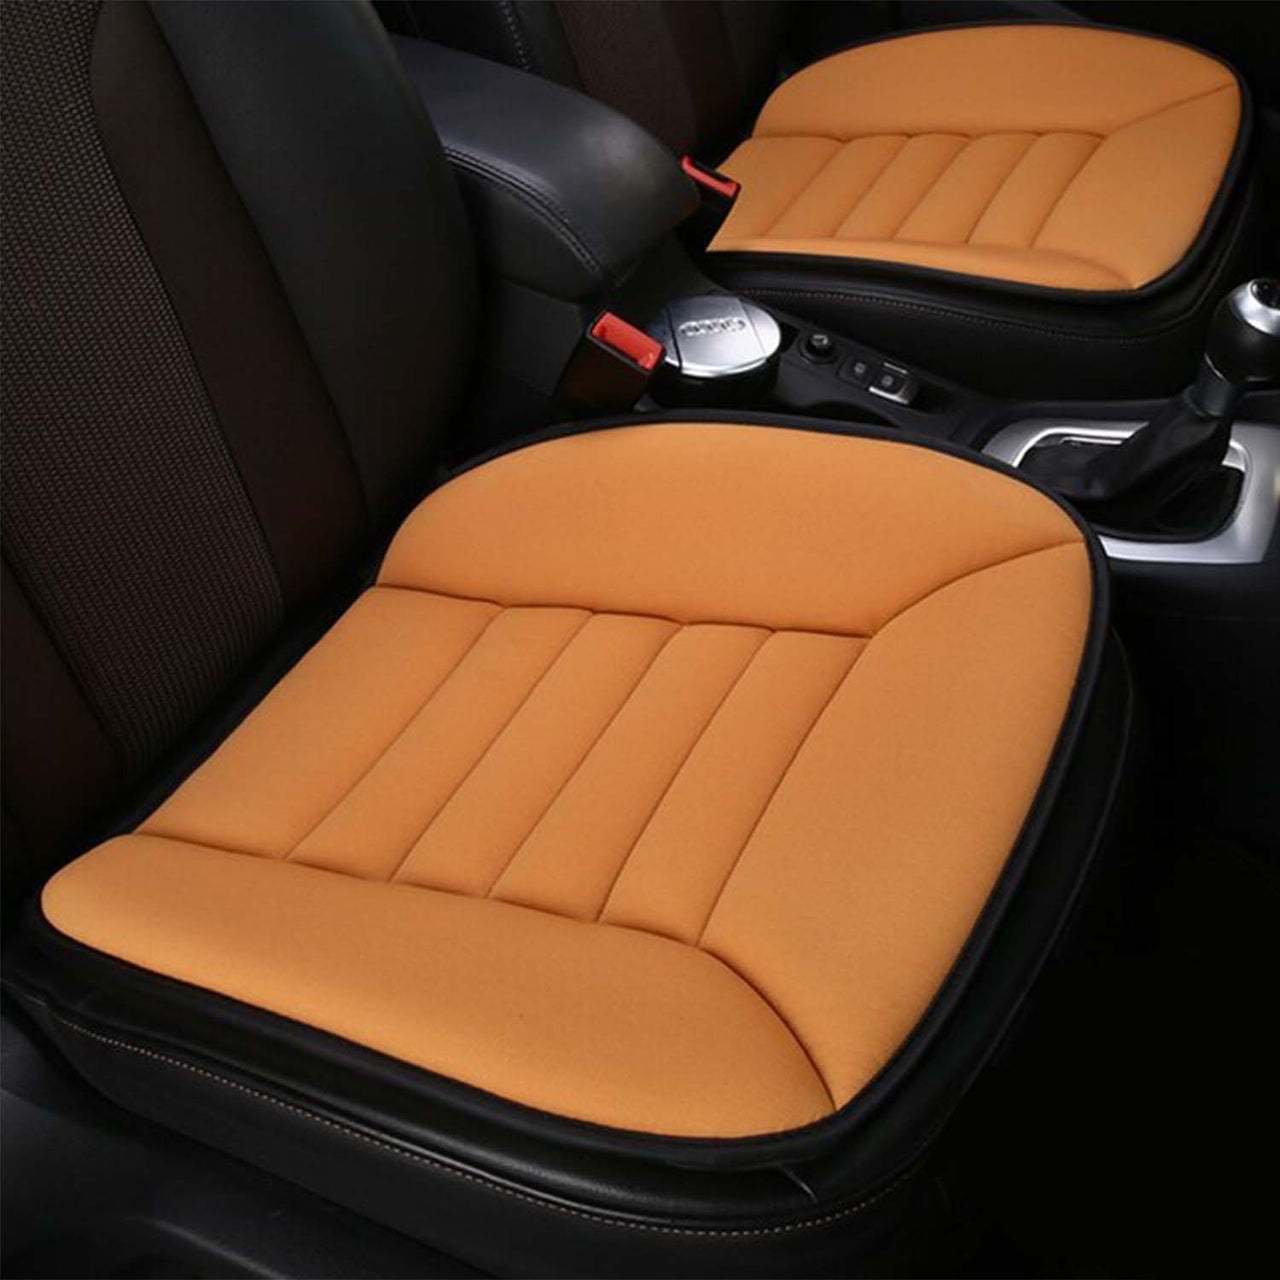 Car Seat Cushion with 1.2inch Comfort Memory Foam, Custom Logo For Your Cars, Seat Cushion for Car and Office Chair KO19989